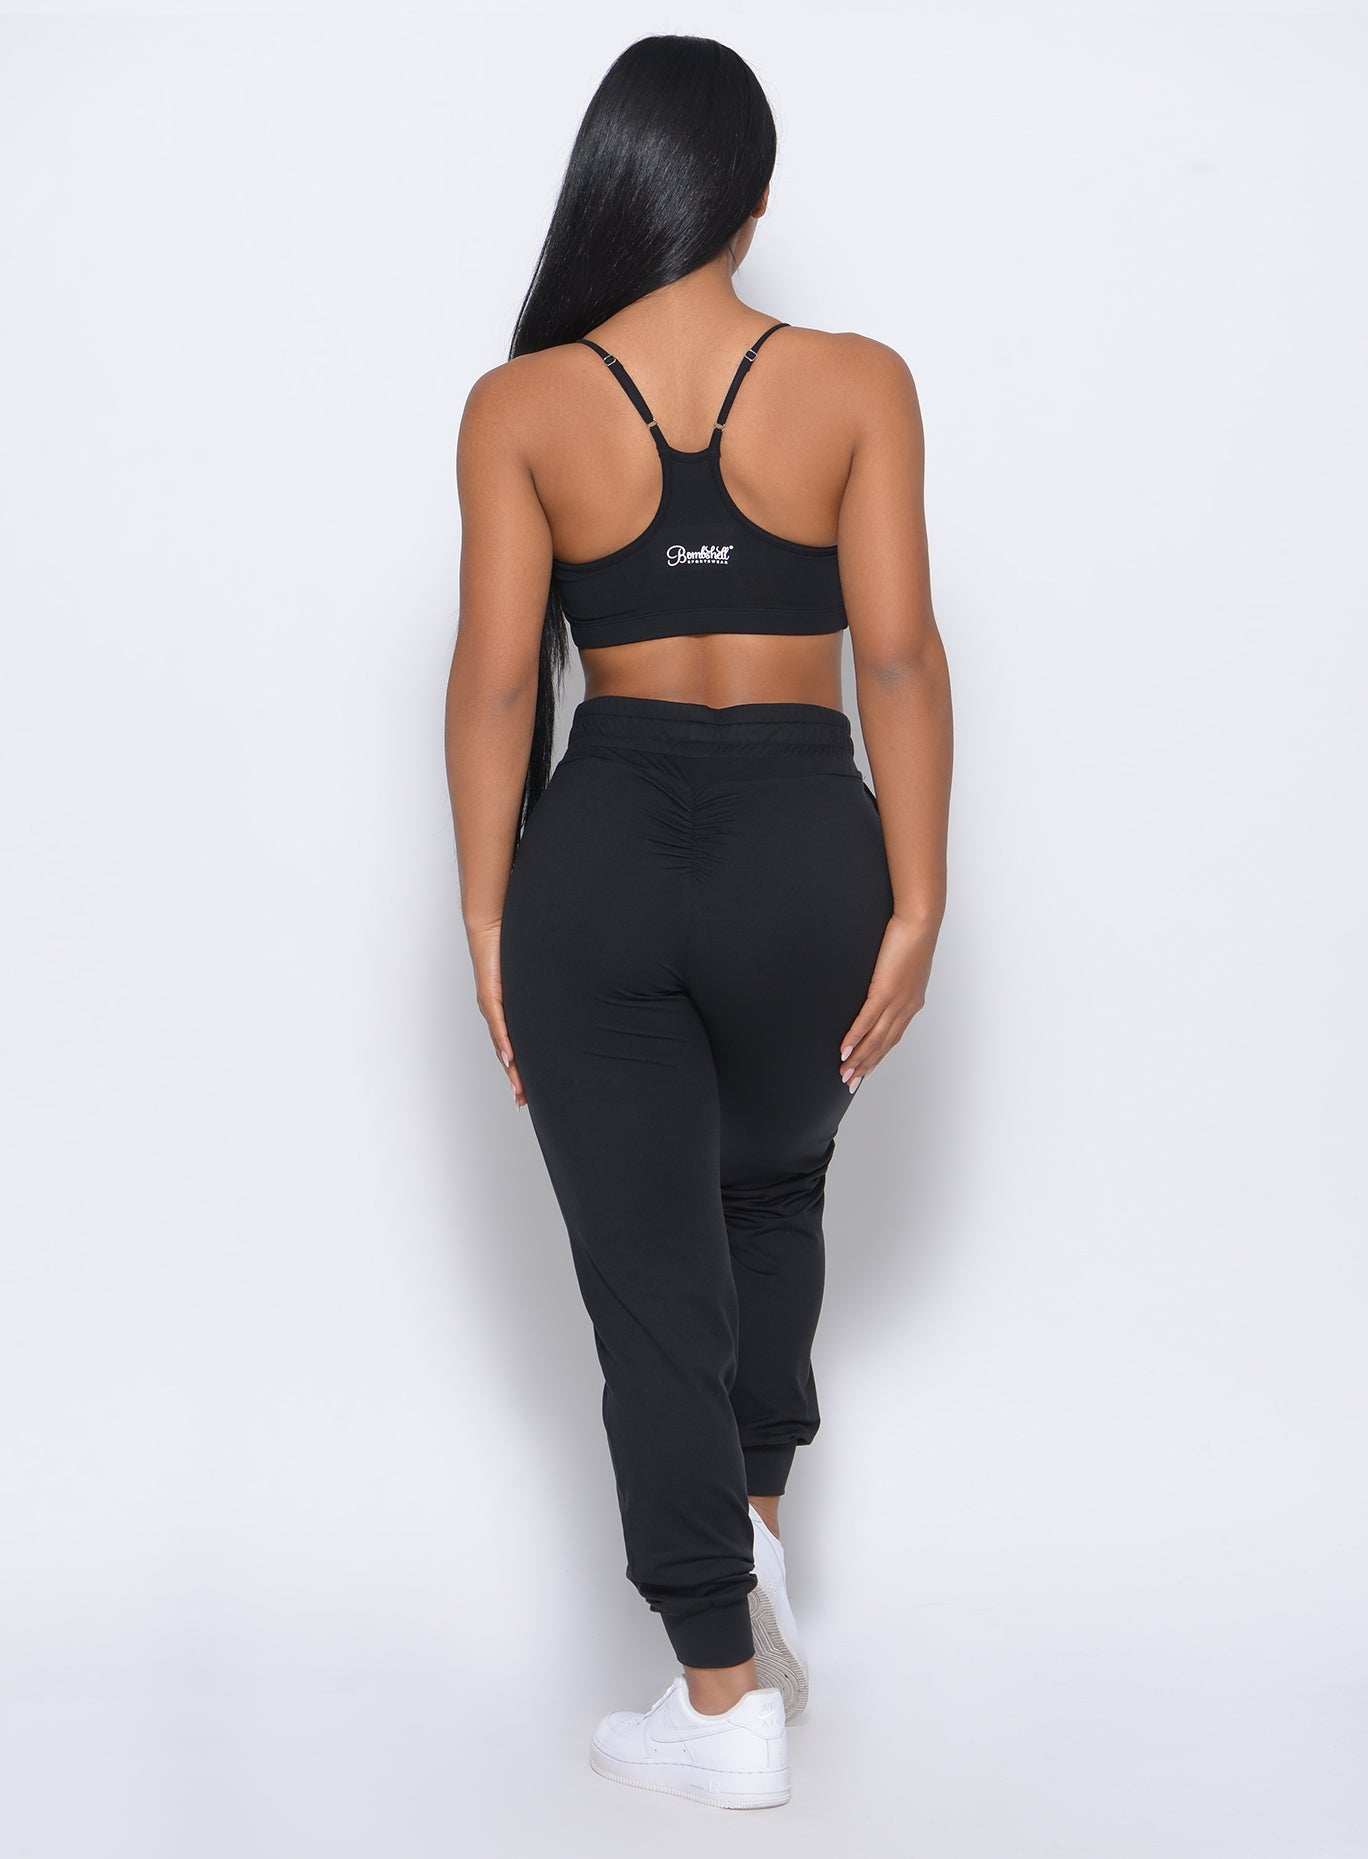 Back profile view of the model in our black Relax Sports Bra and a matching joggers